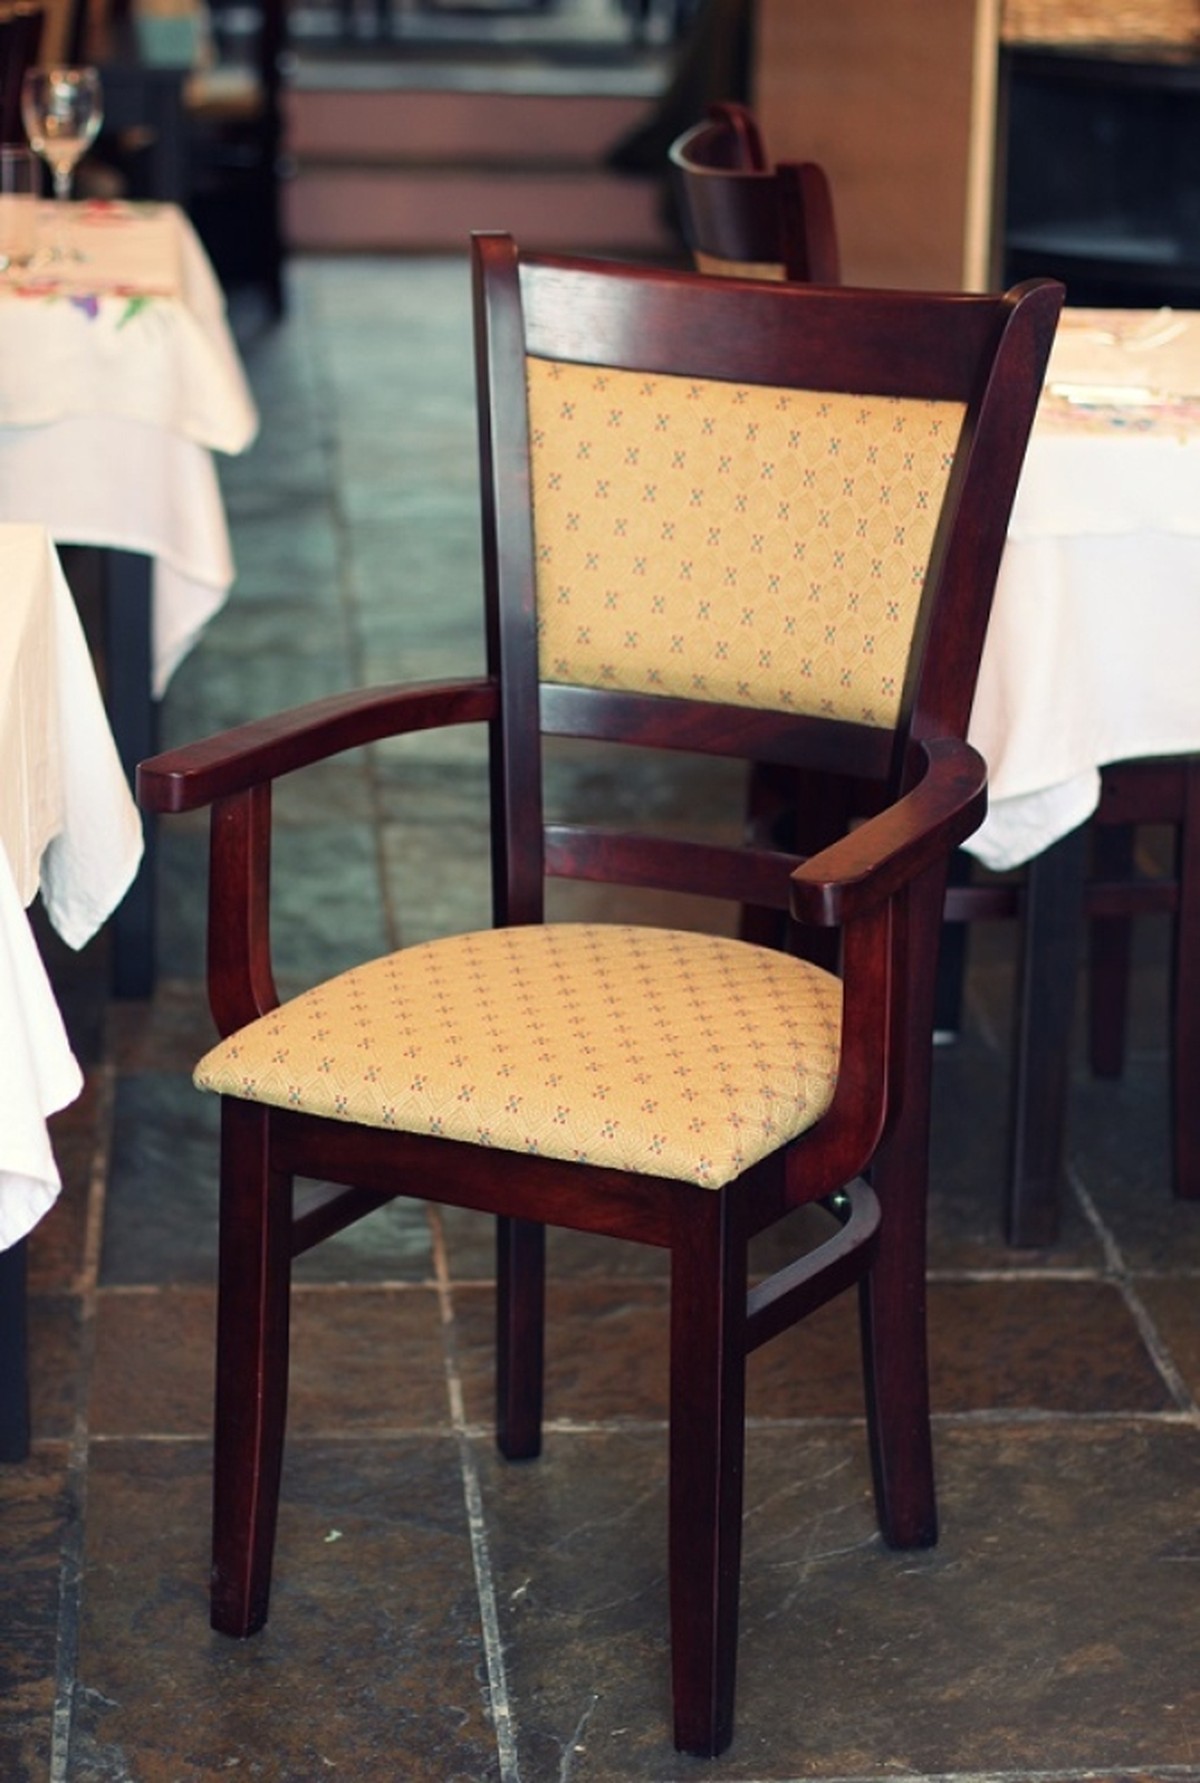 Secondhand Chairs and Tables | Restaurant Chairs | 40x Boxed New